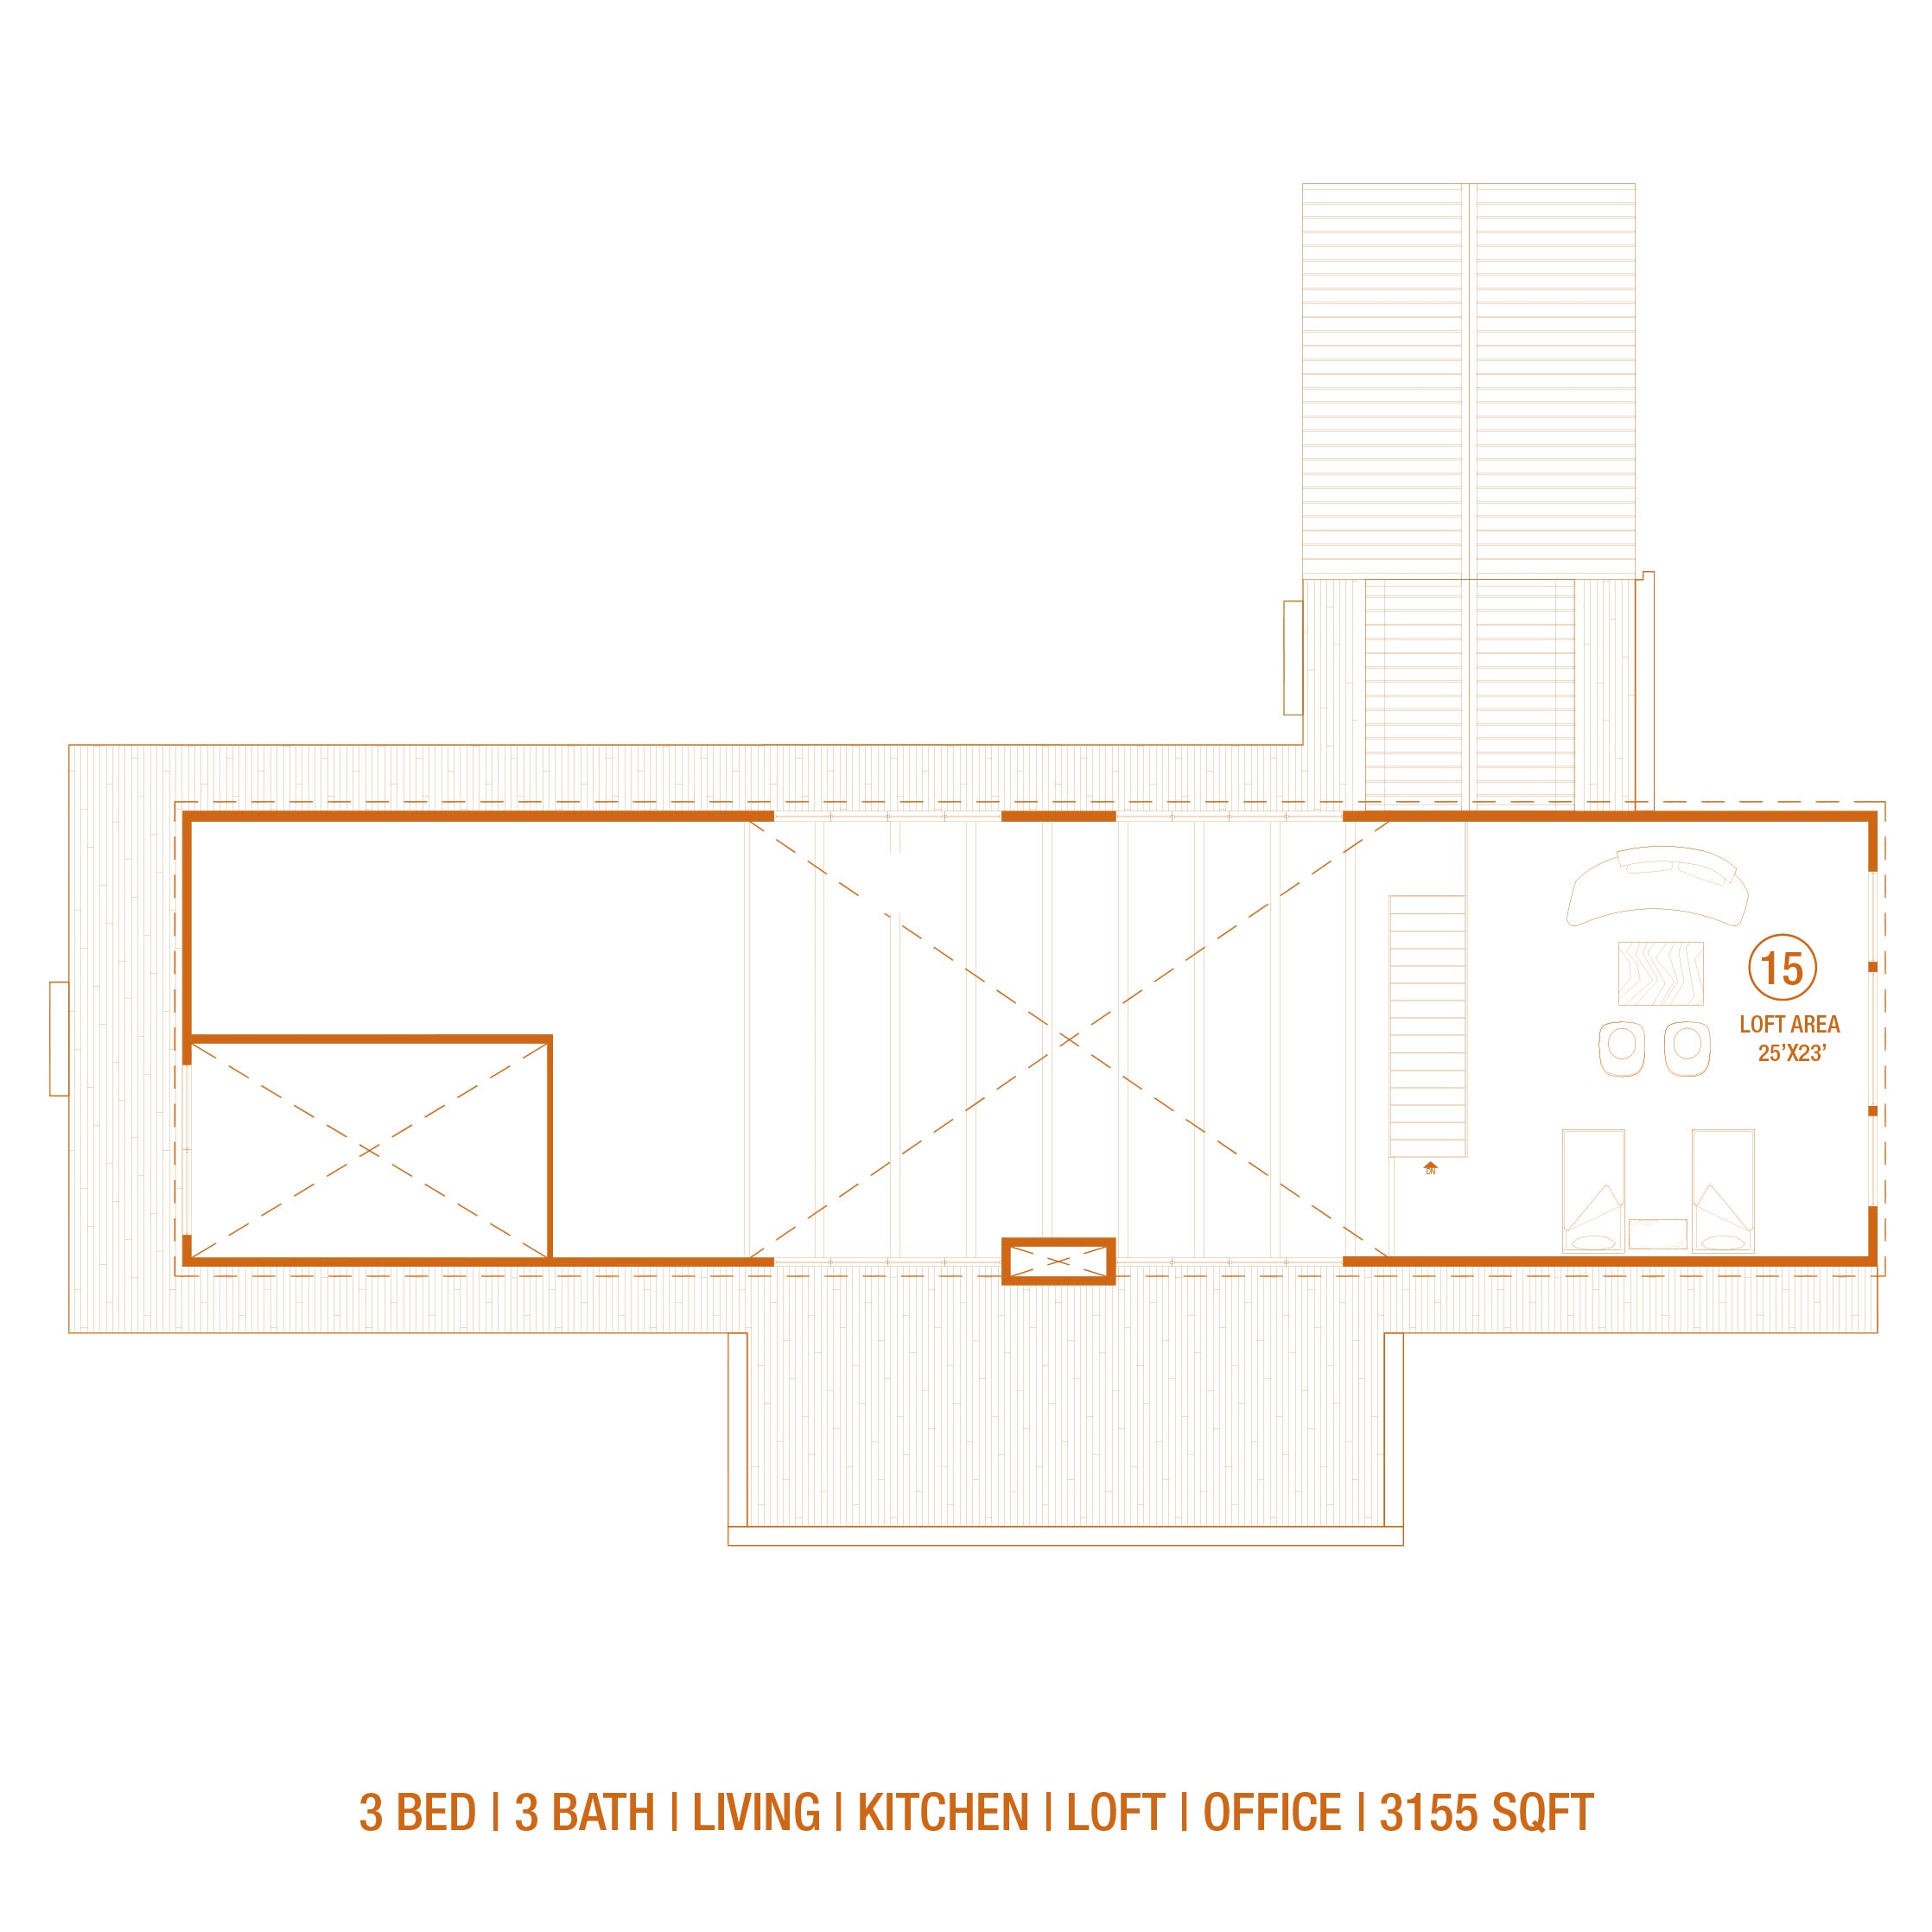 Floor plan layout of the loft level from architectural cabin design 